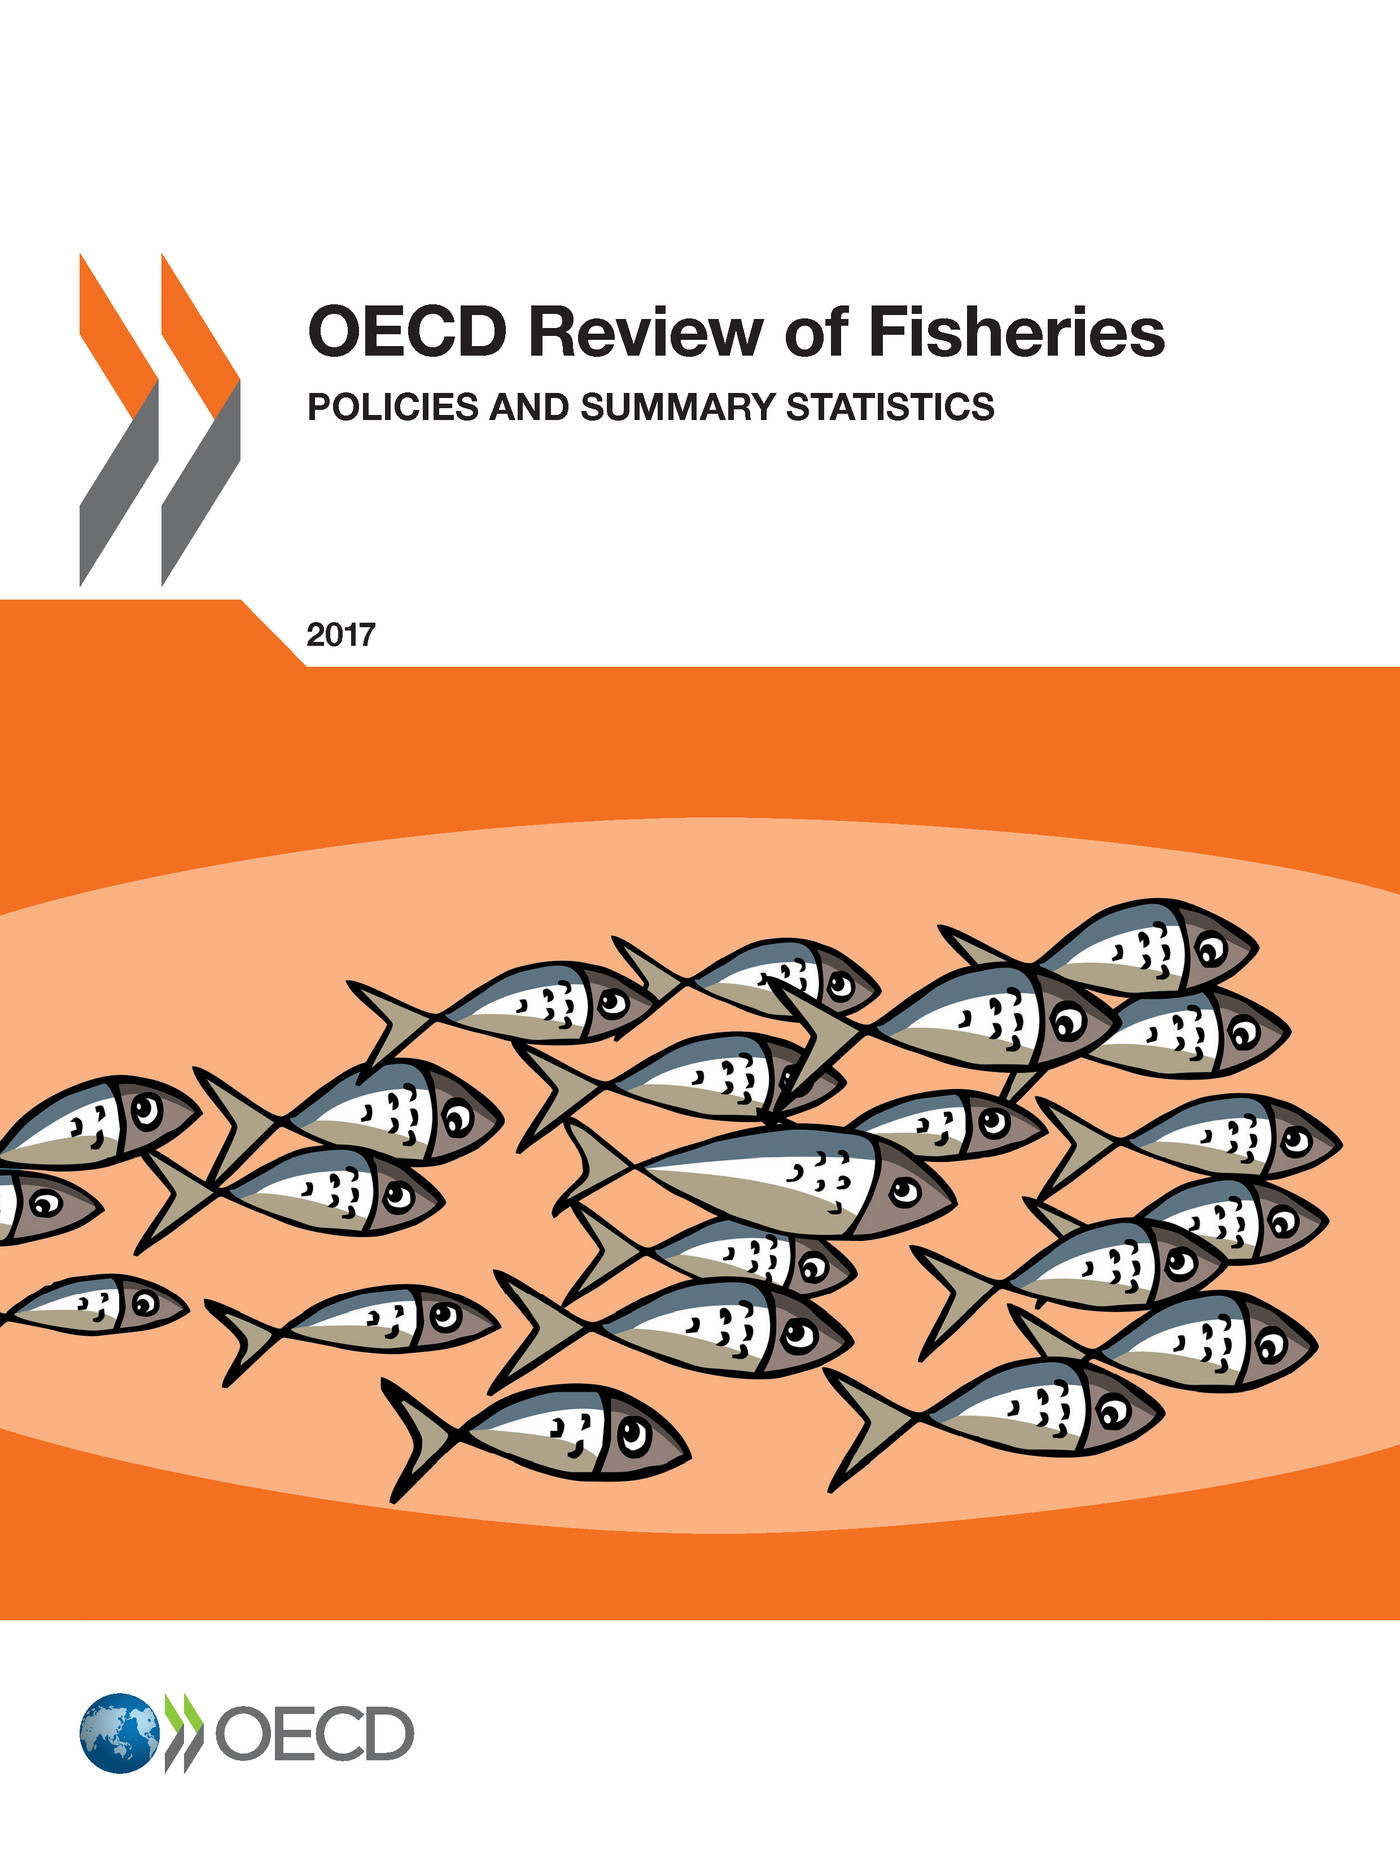 OECD Review of Fisheries: Policies and Summary Statistics 2017 -  Collectif - OCDE / OECD